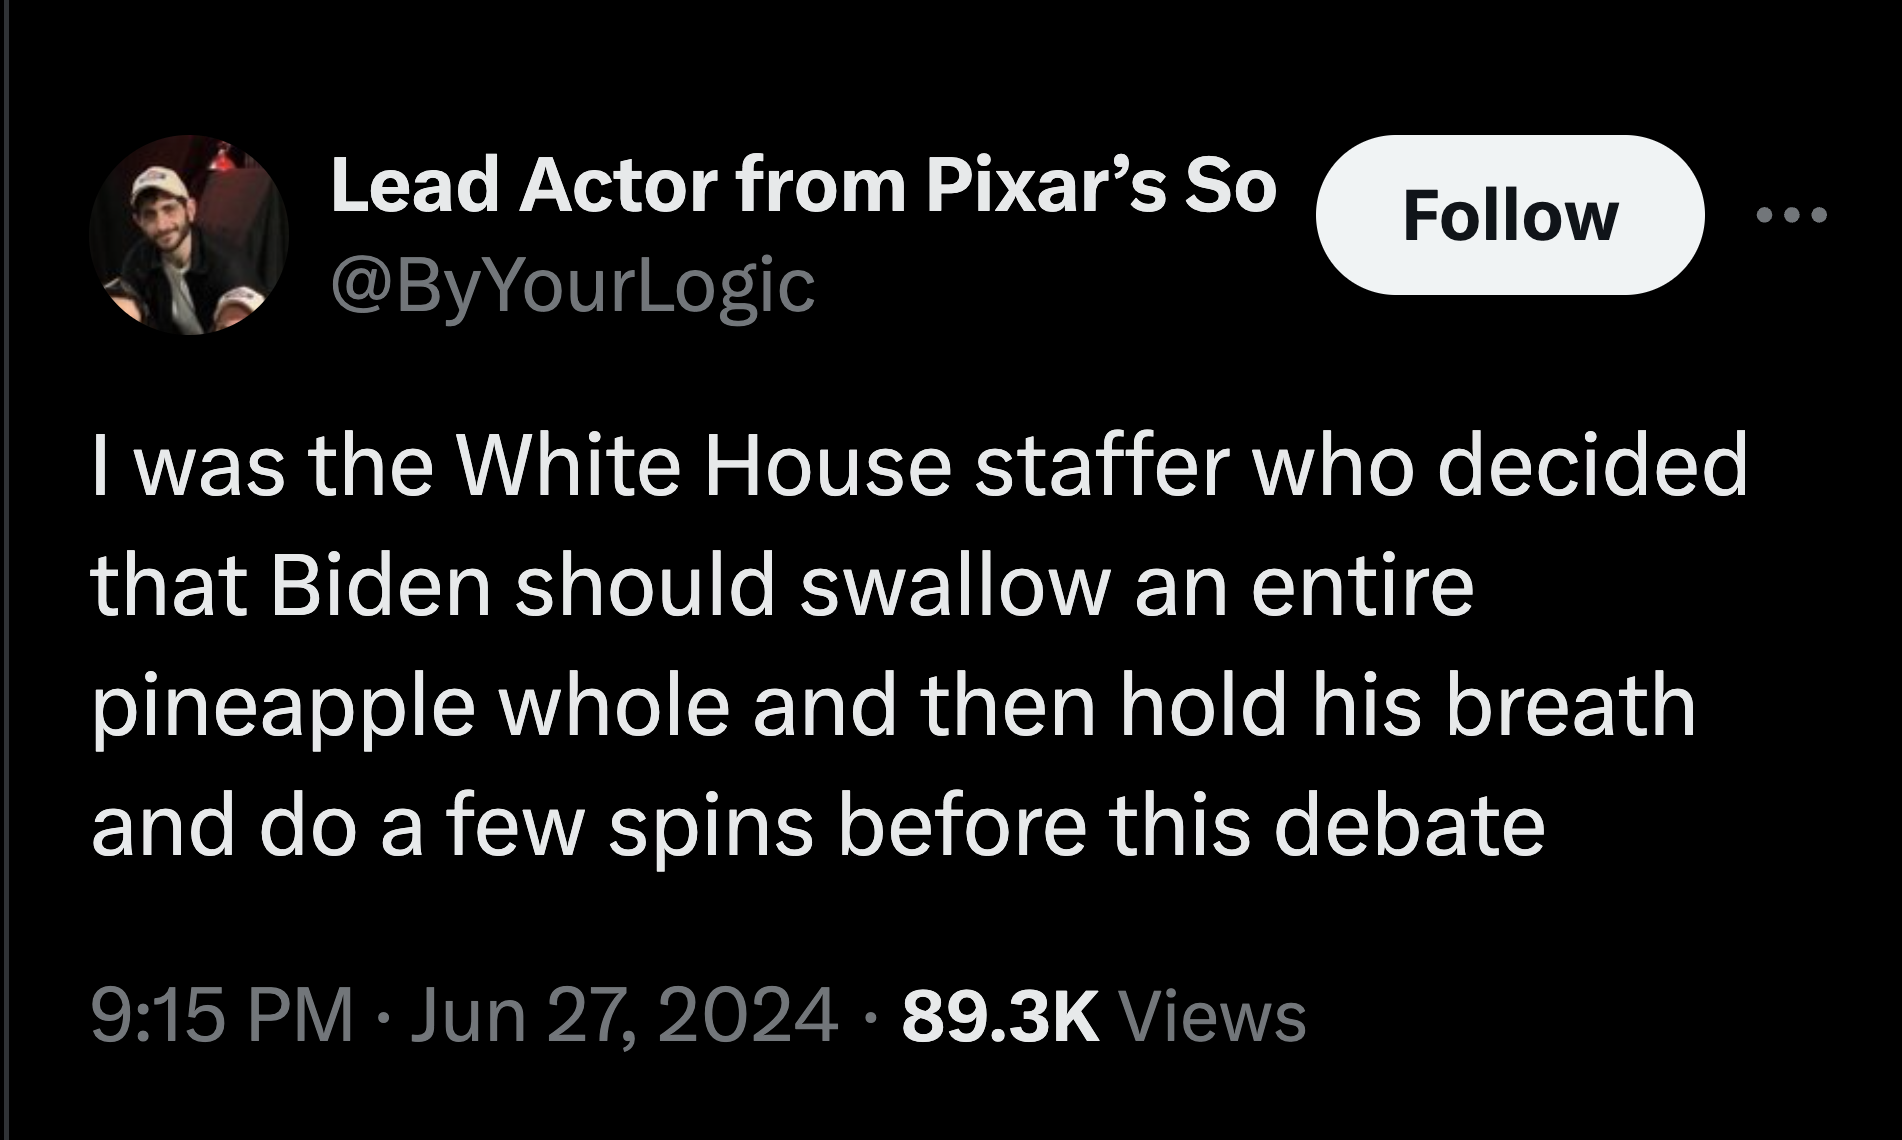 screenshot - Lead Actor from Pixar's So I was the White House staffer who decided that Biden should swallow an entire pineapple whole and then hold his breath and do a few spins before this debate Views